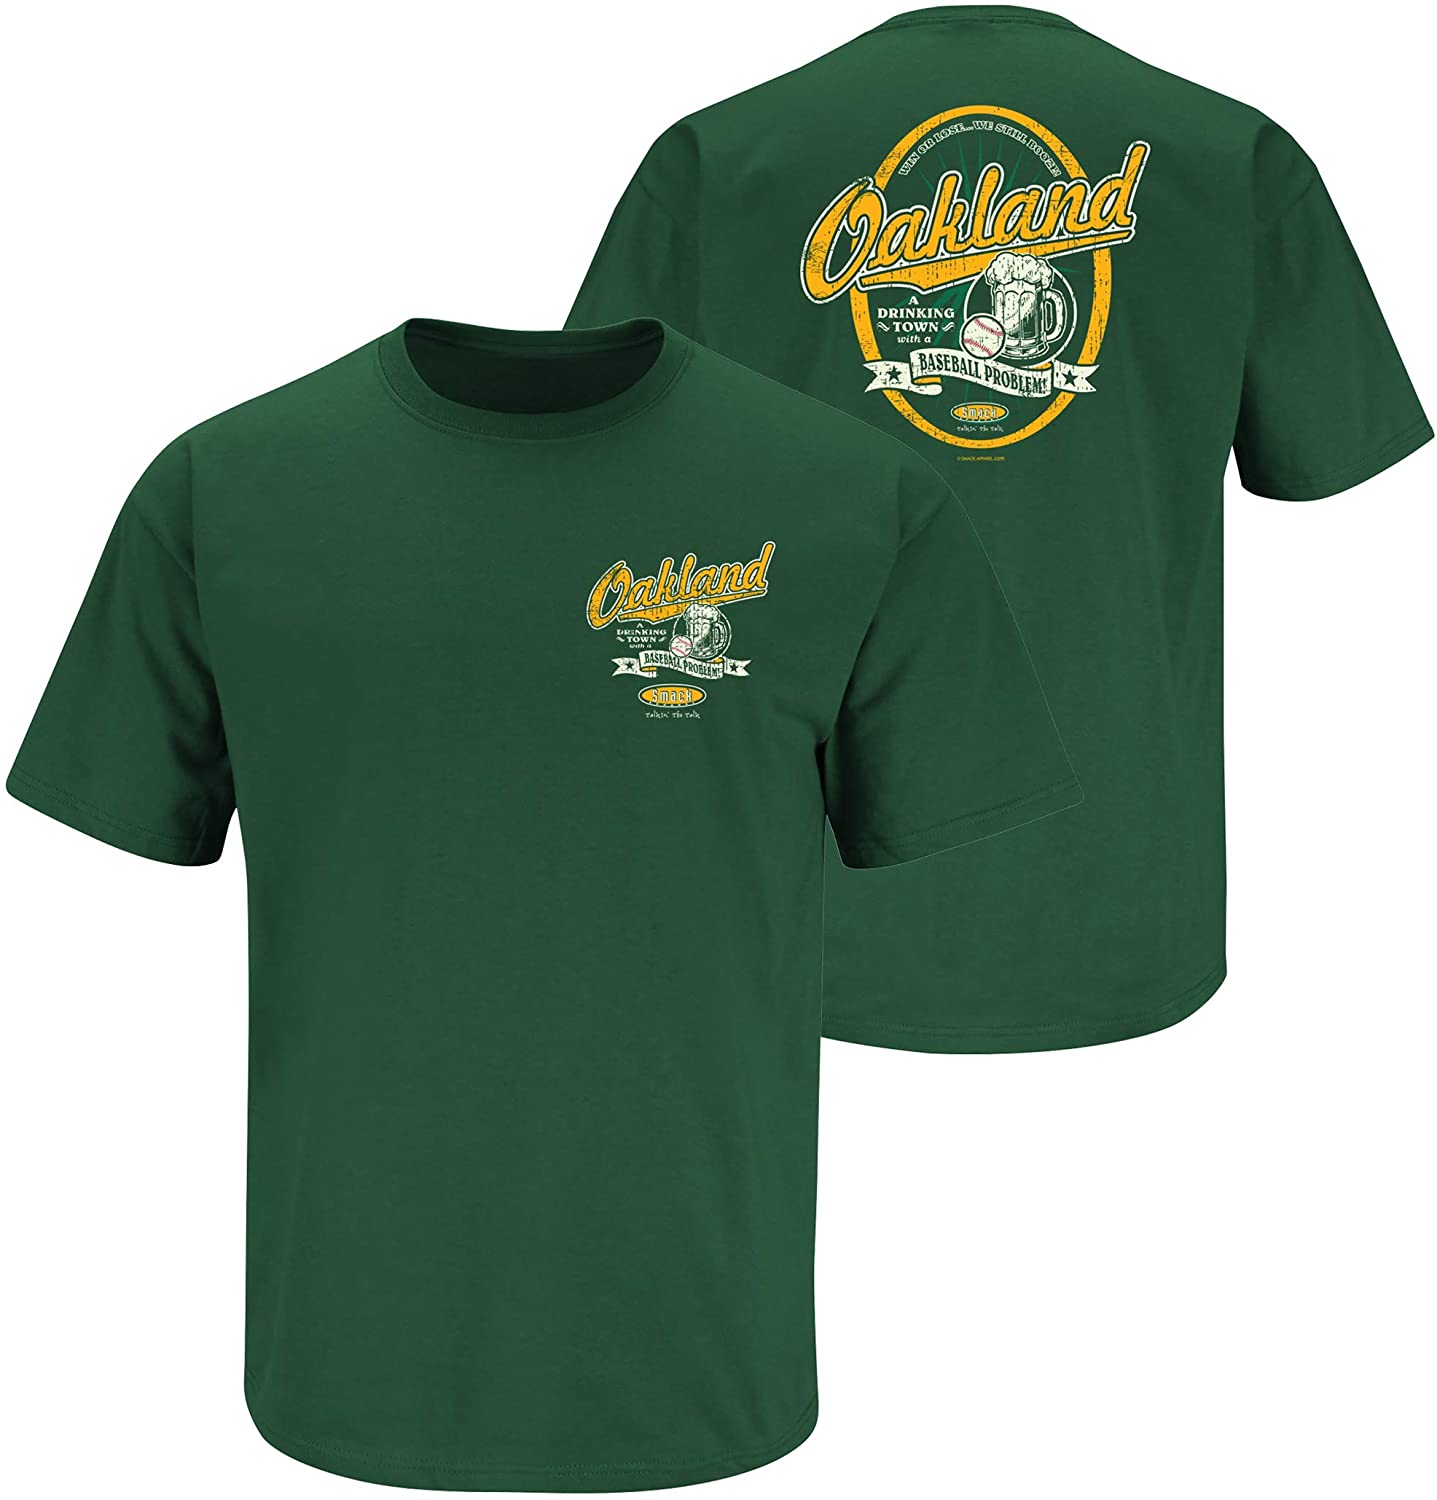 Oakland Athletics Apparel, A's Jersey, A's Clothing and Gear